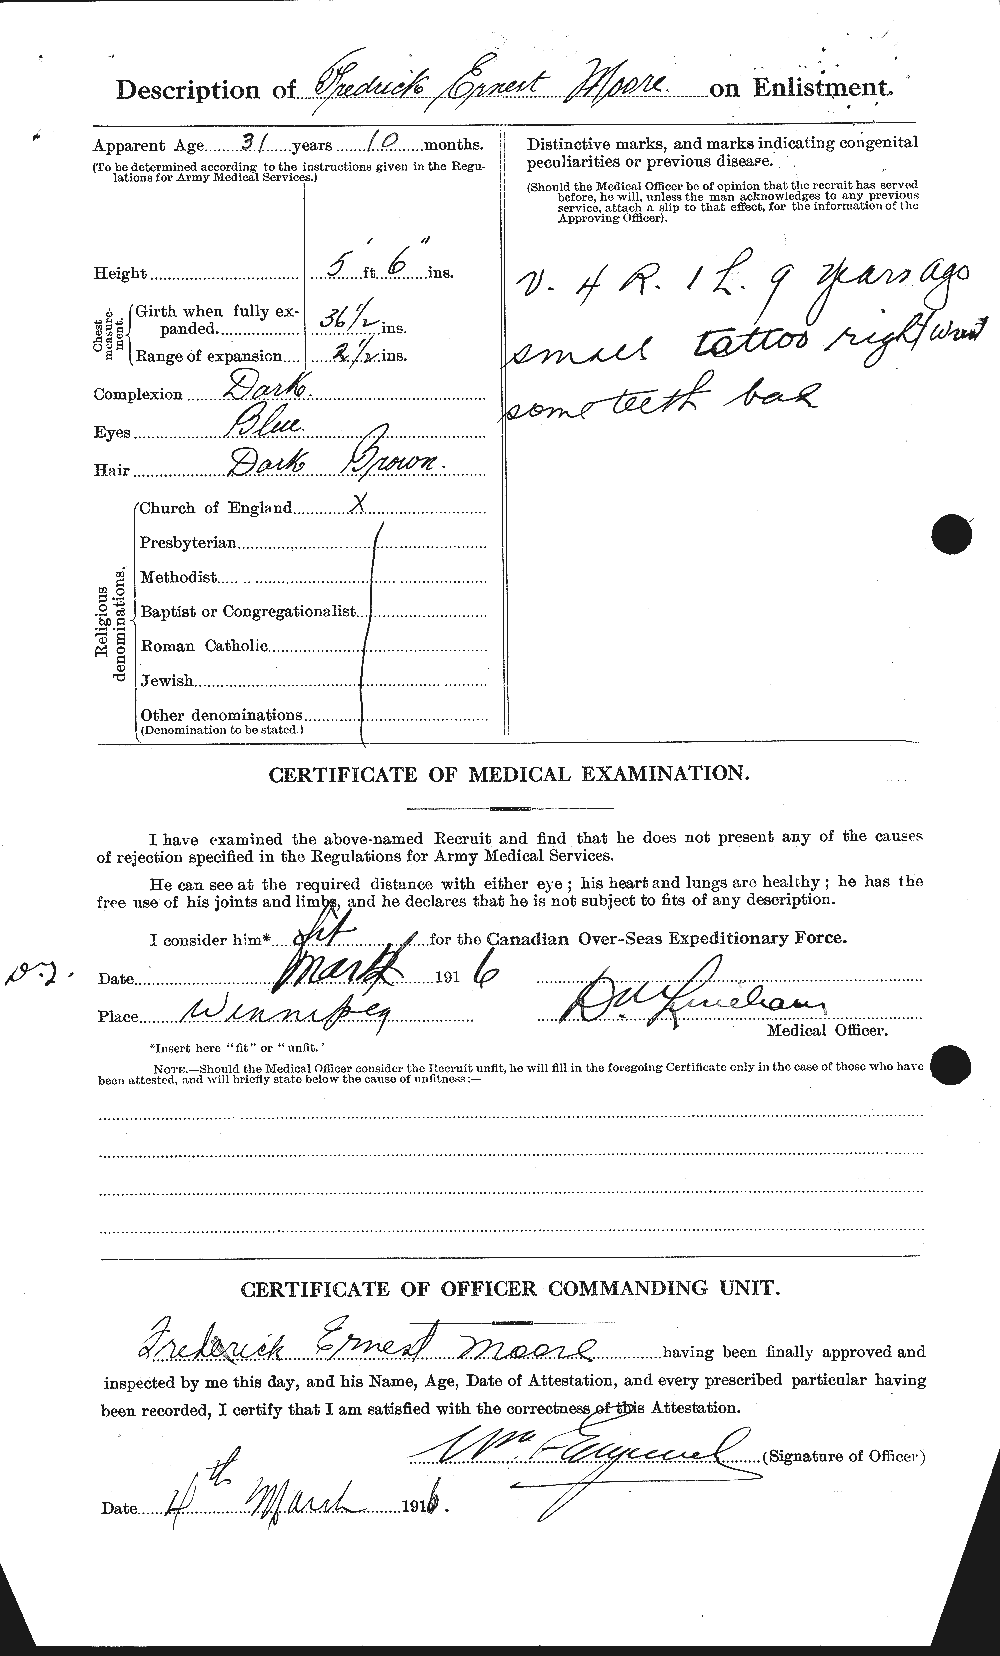 Personnel Records of the First World War - CEF 506761b